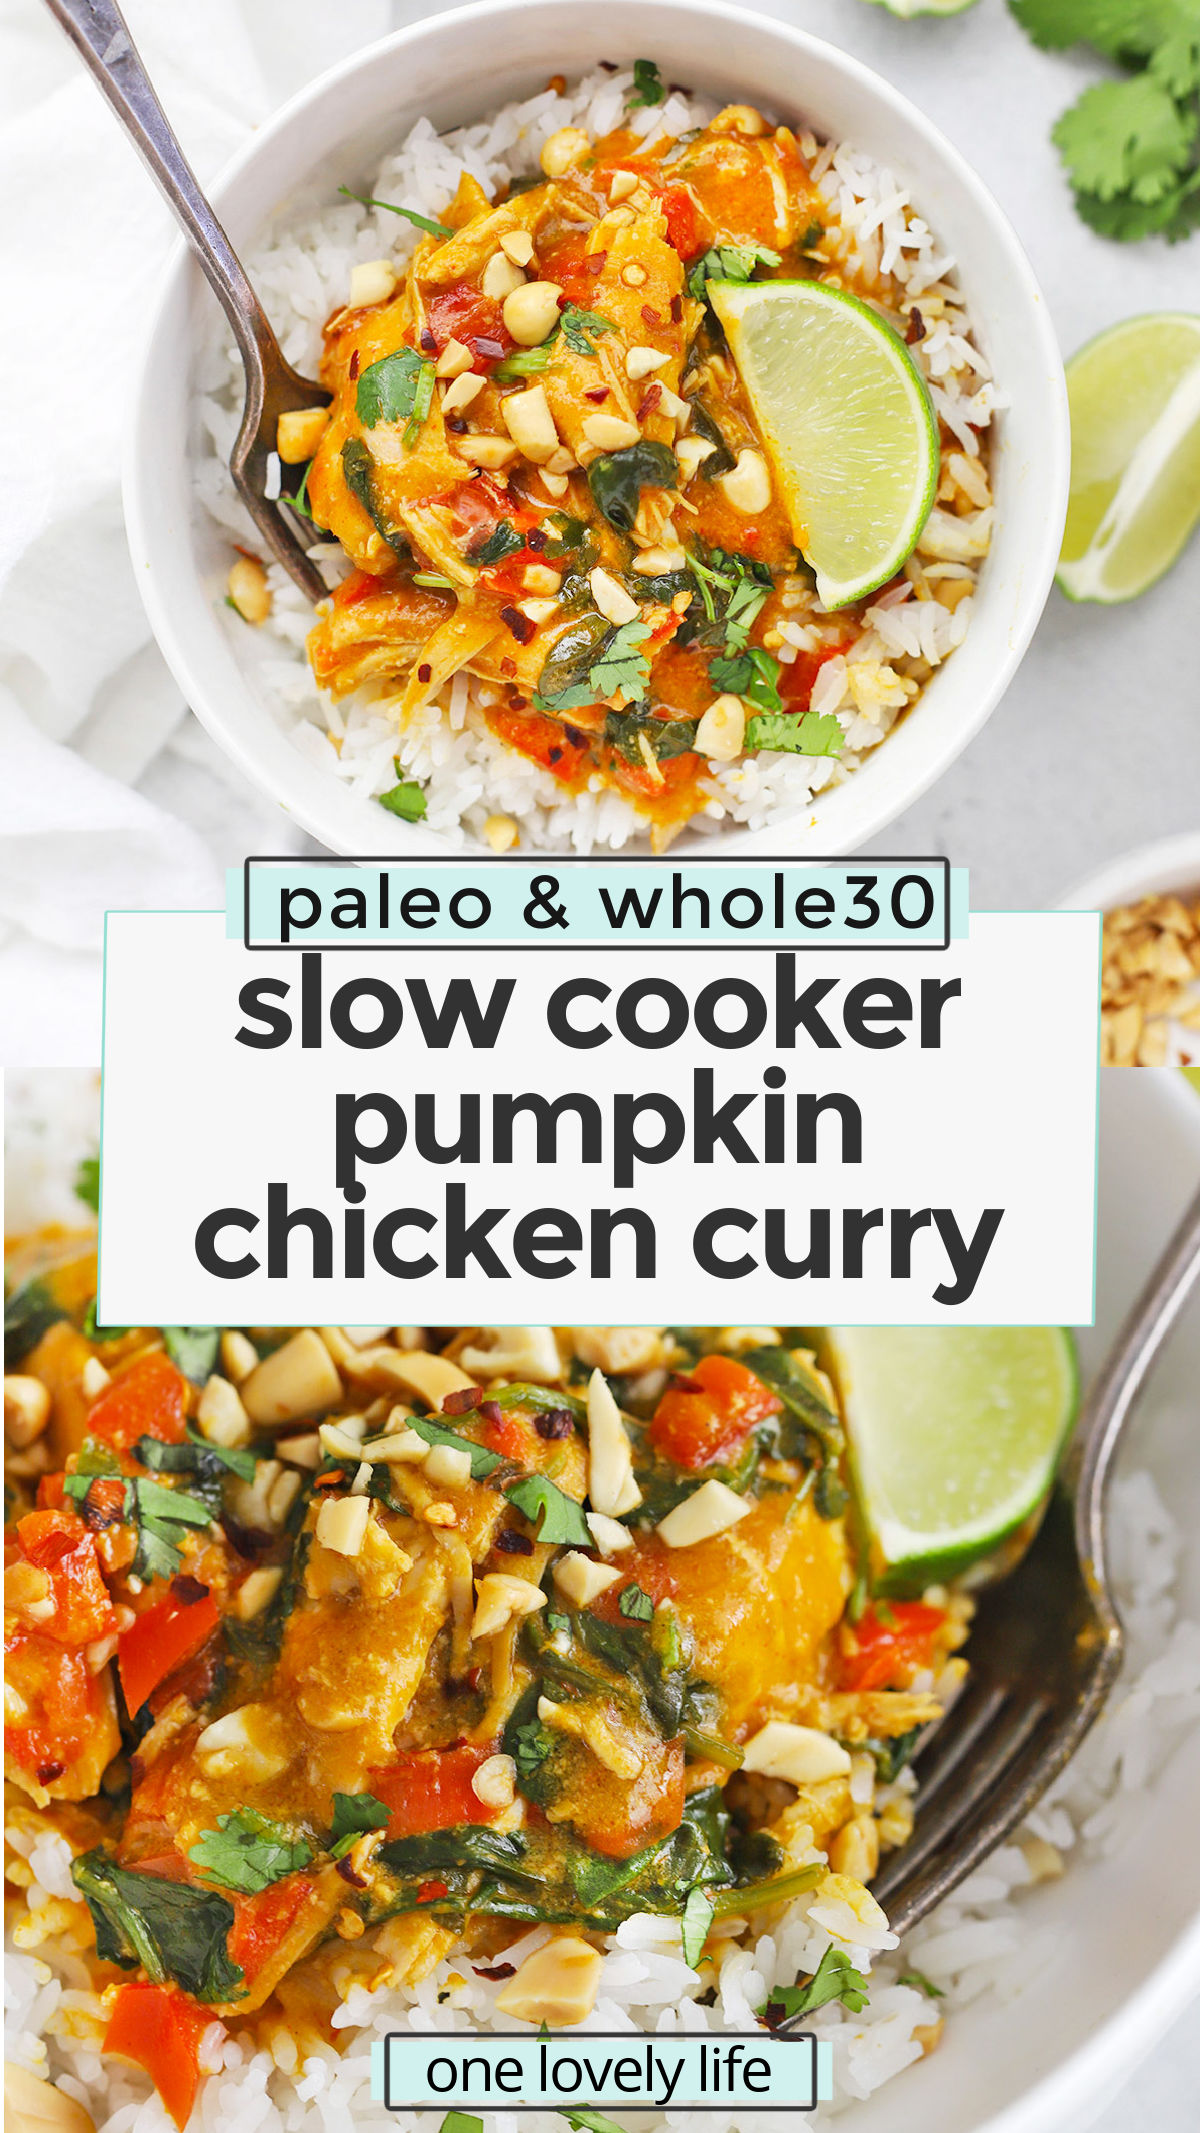 Slow Cooker Pumpkin Chicken Curry - This cozy pumpkin curry has tender chicken, colorful veggies & a mega-flavorful sauce to warm you up from the inside out. (Paleo, Whole30, Gluten-Free) // Pumpkin Curry Recipe // Slow cooker curry // savory pumpkin recipes // healthy dinner // paleo slow cooker recipe // whole30 slow cooker recipe // paleo chicken // healthy pumpkin recipe #glutenfree #pumpkin #slowcooker #crockpot #paleo #whole30